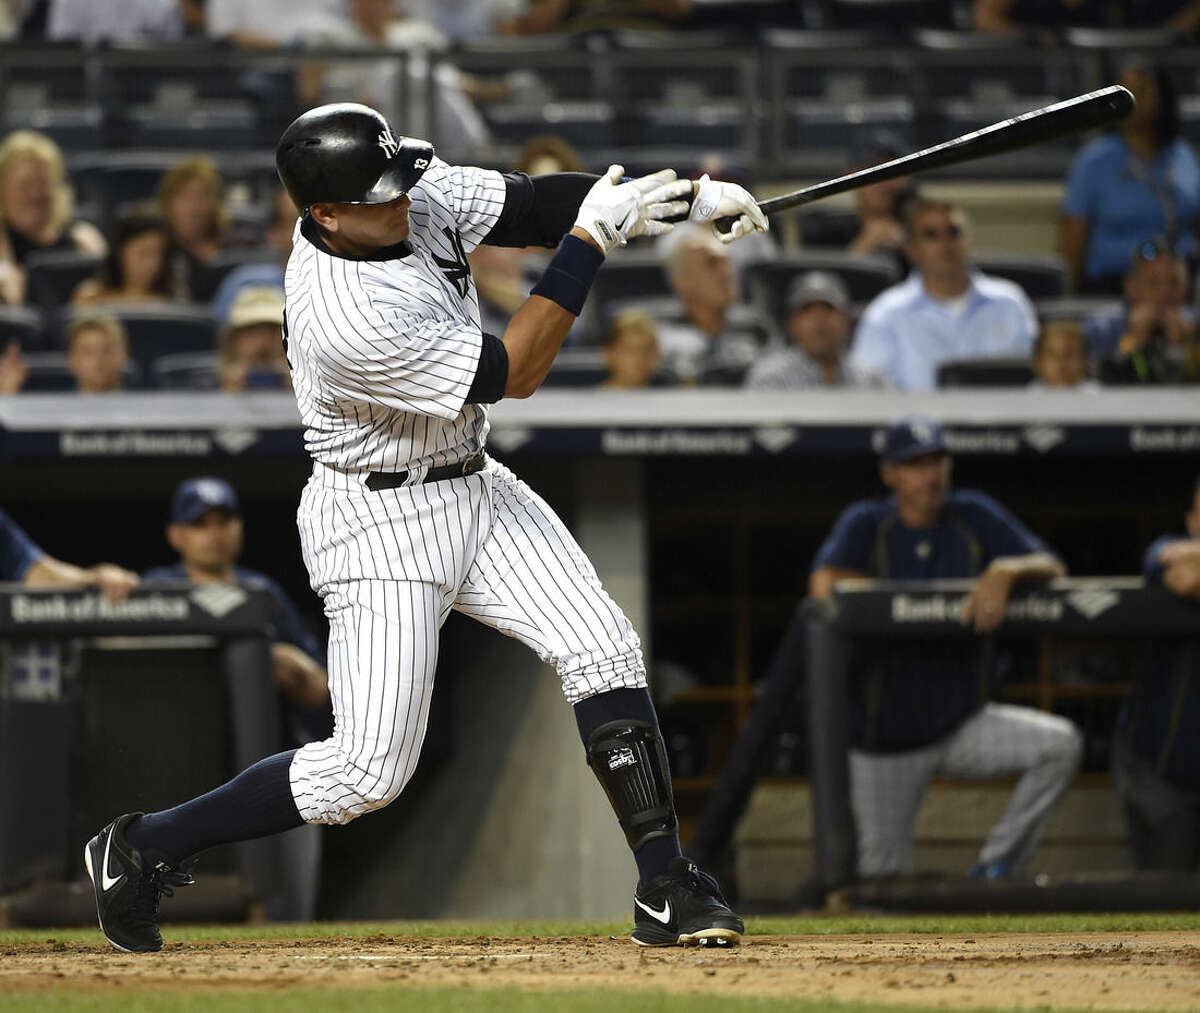 New York Yankees designated hitter Alex Rodriguez hits a two-run home run off of Tampa Bay Rays starting pitcher Jake Odorizzi in the second inning of a baseball game at Yankee Stadium on Friday, Sept. 4, 2015, in New York. (AP Photo/Kathy Kmonicek)